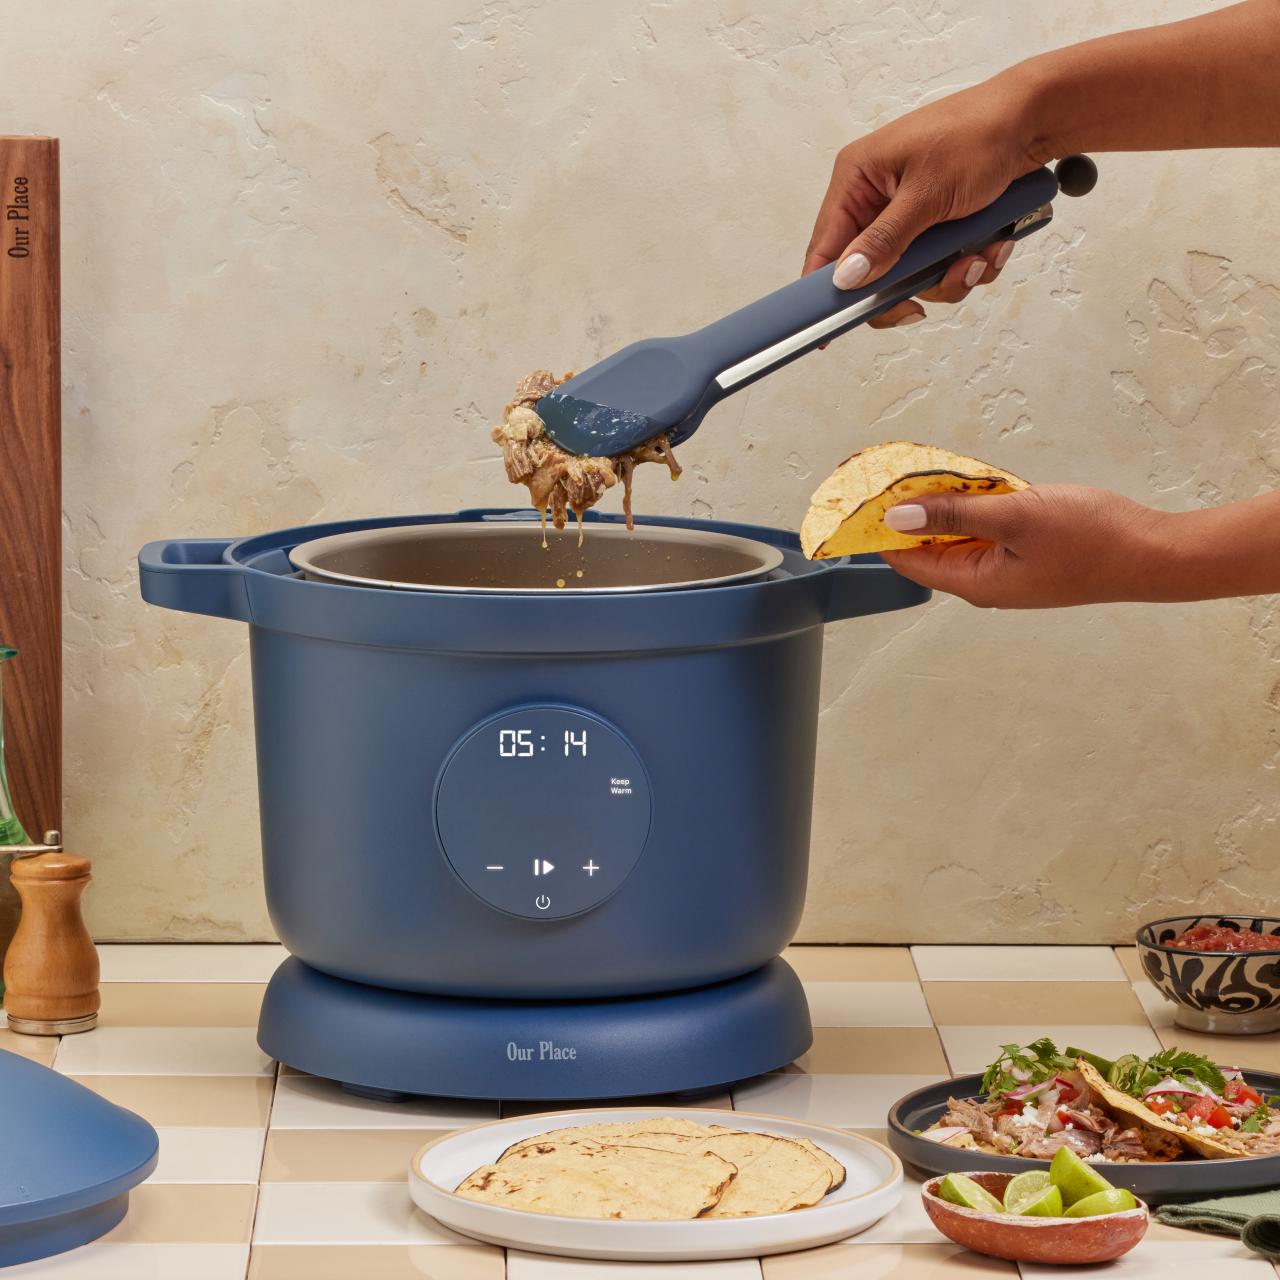 Our Place Launches the Dream Cooker Multi-Cooker, Shopping : Food Network